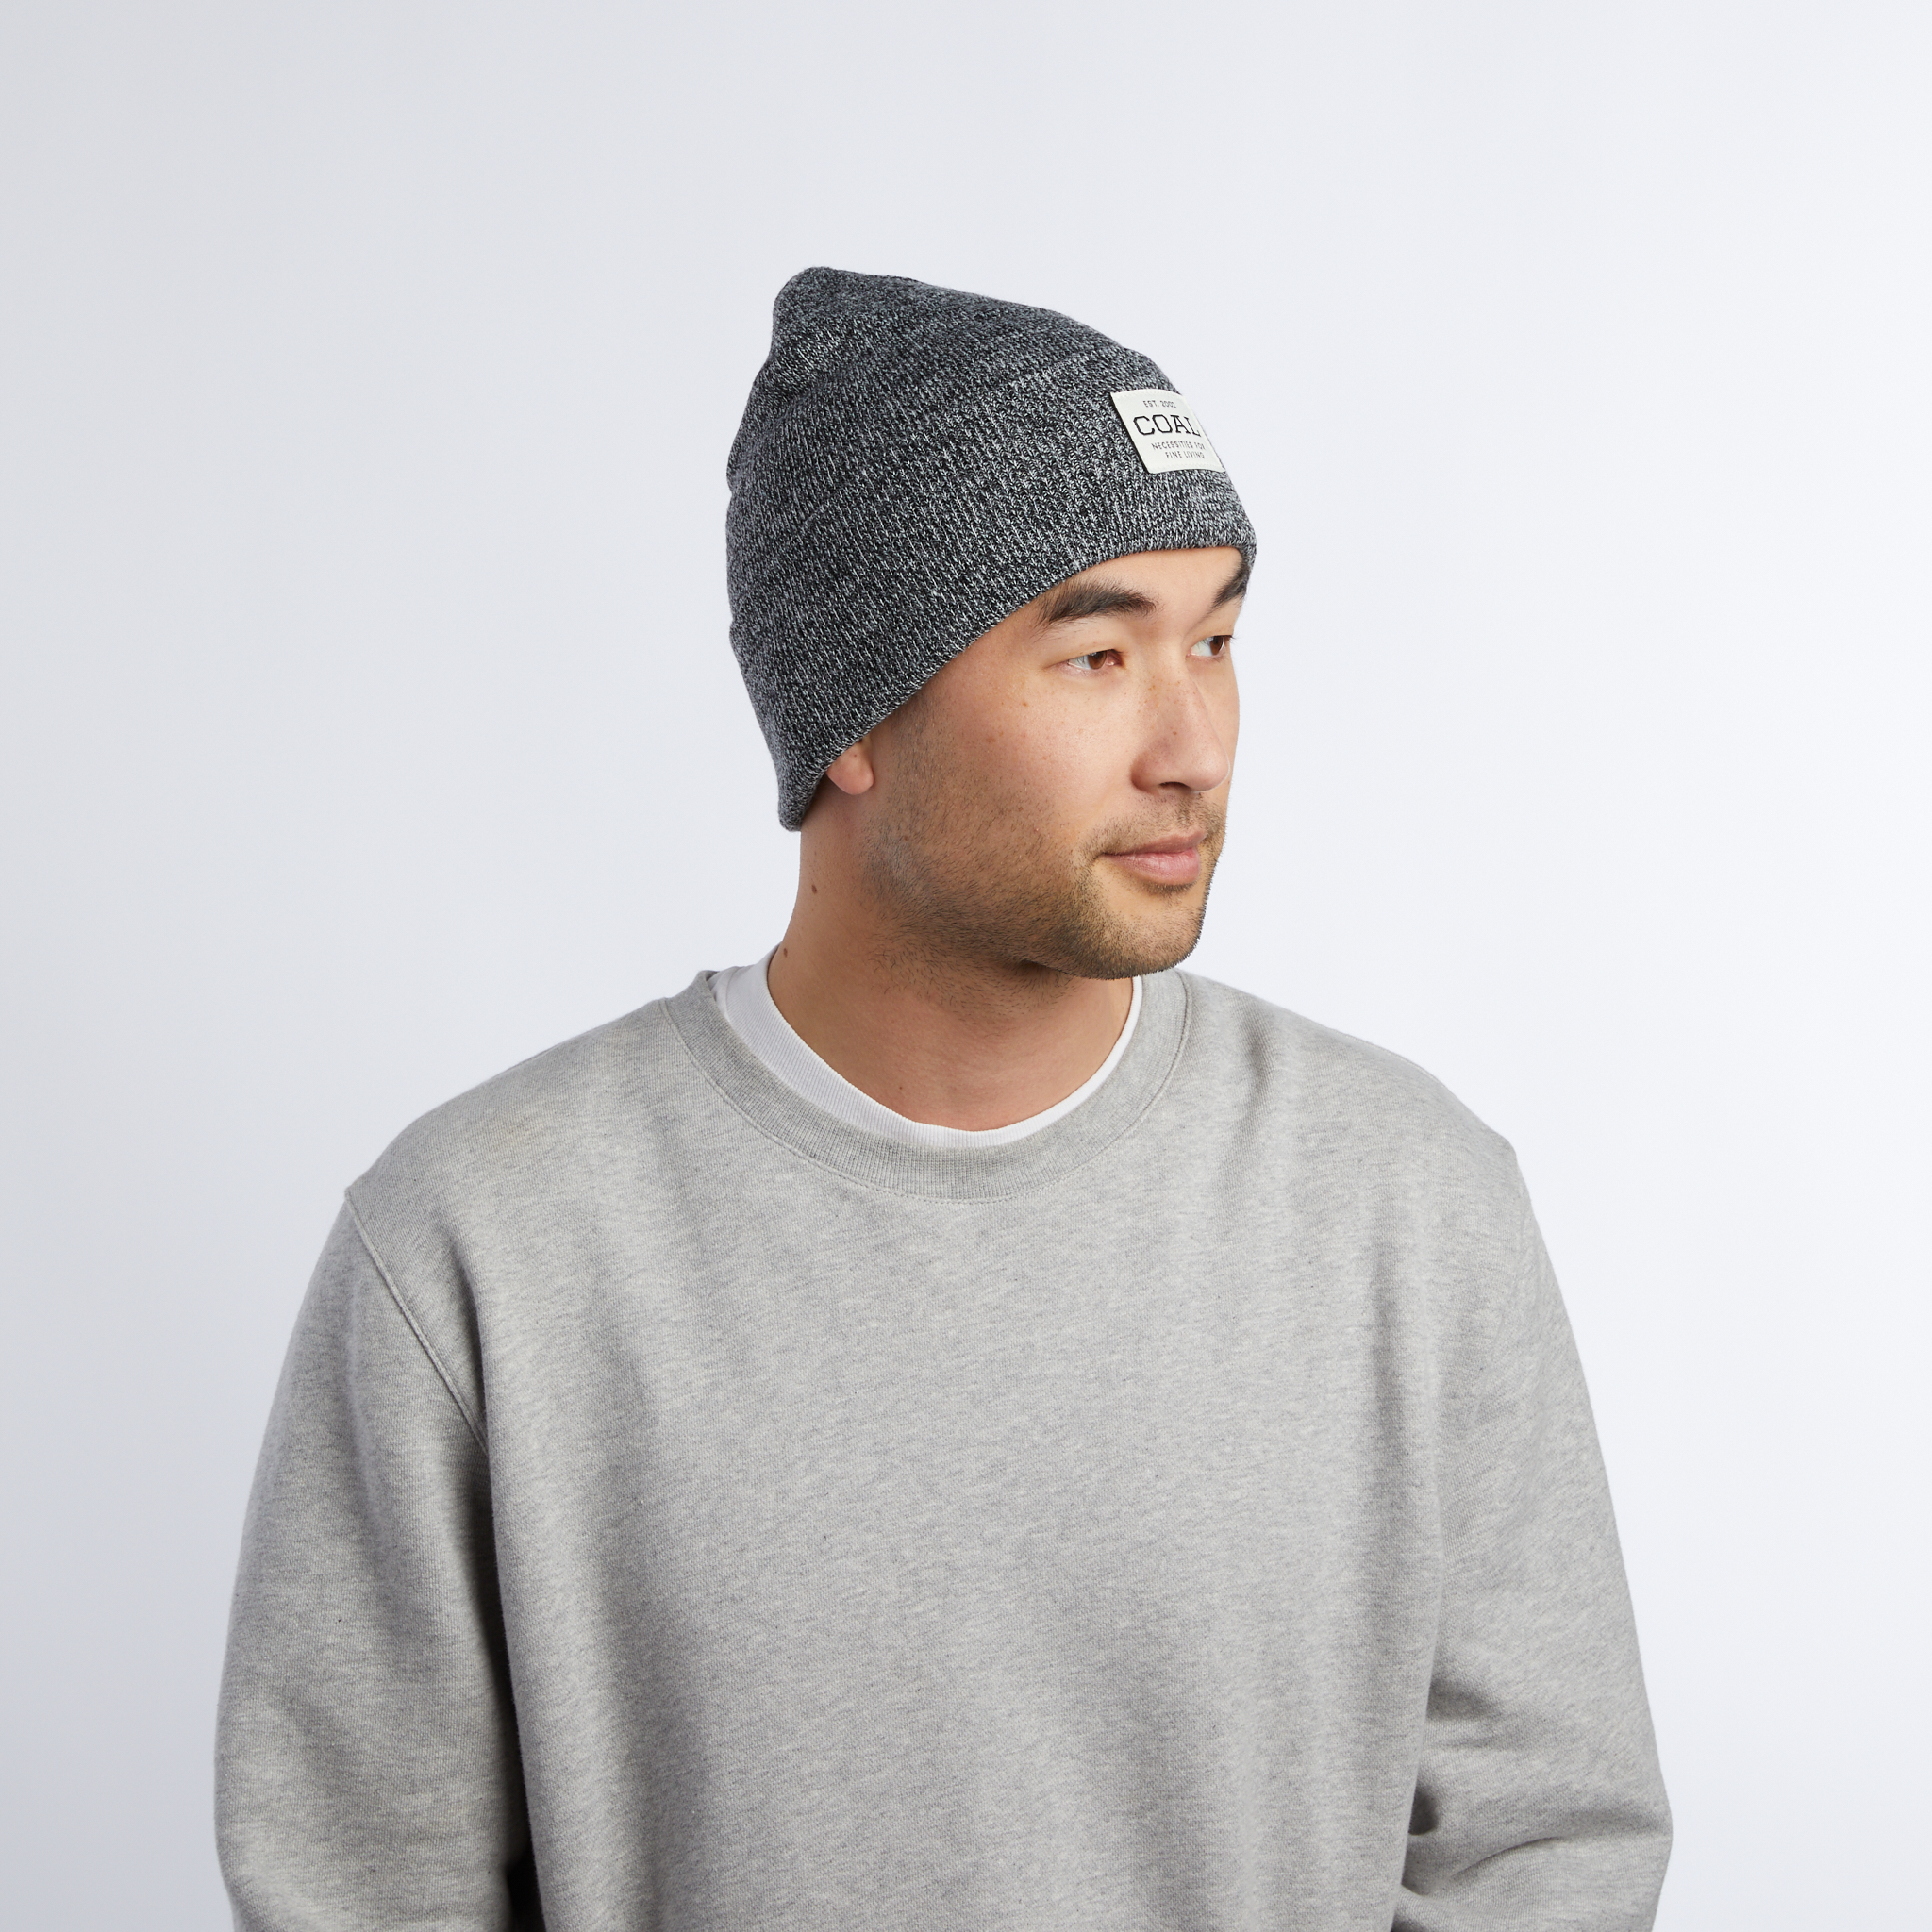 HUK Men's Knit Cuffed Winter Beanie, Huk'd Up-Khaki, One Size at   Men's Clothing store